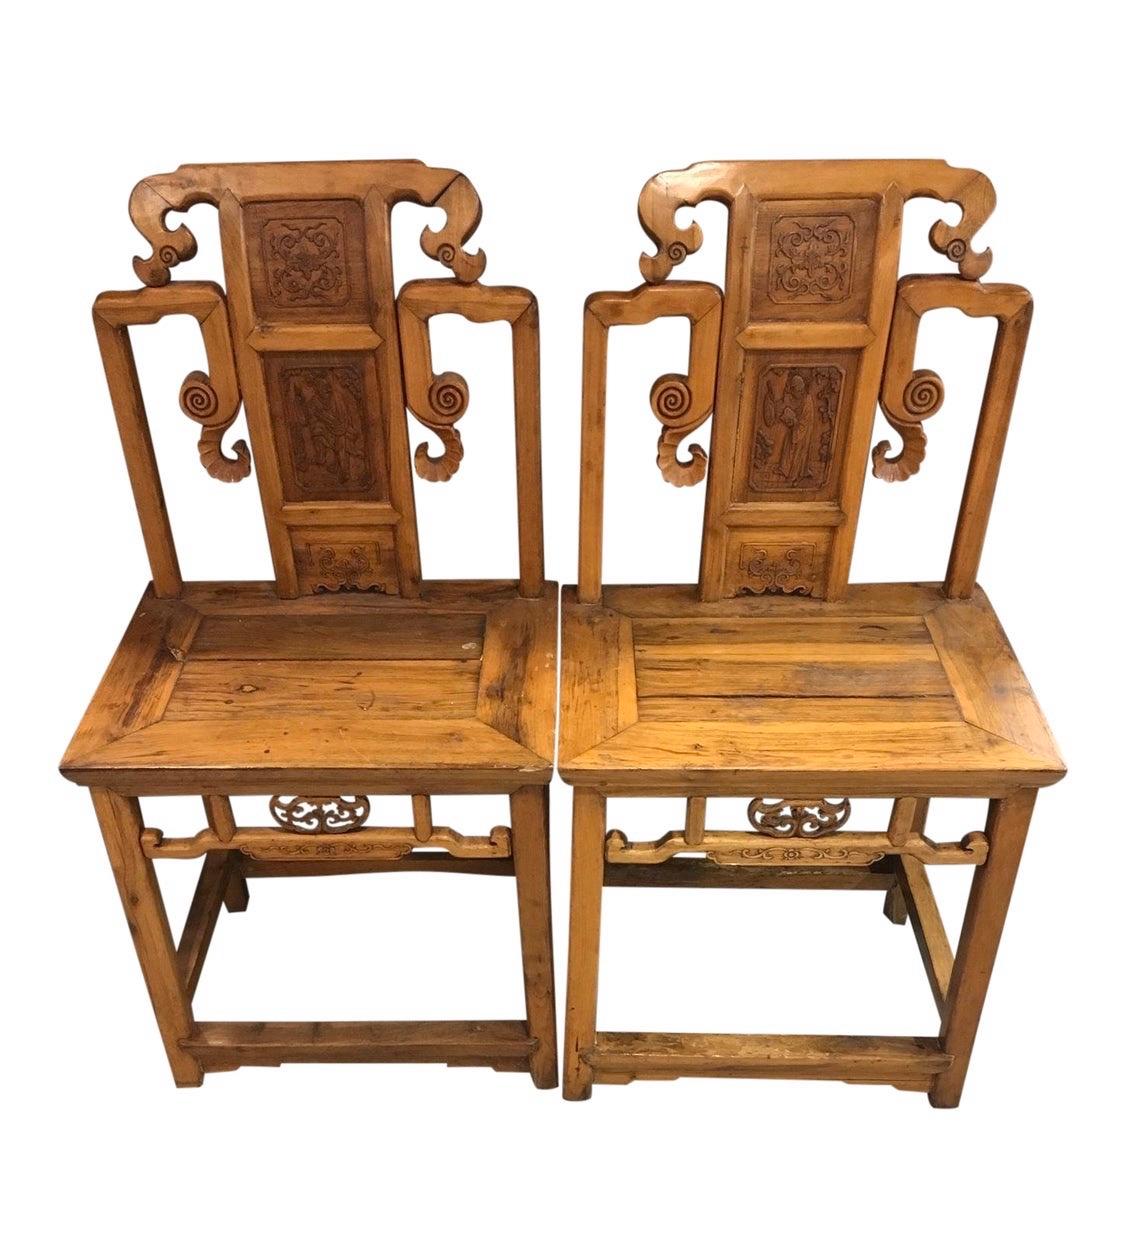 Elegant pair of two matching heavily carved Chinese altar chairs. Both have intricate carvings and date to the late 20th century.